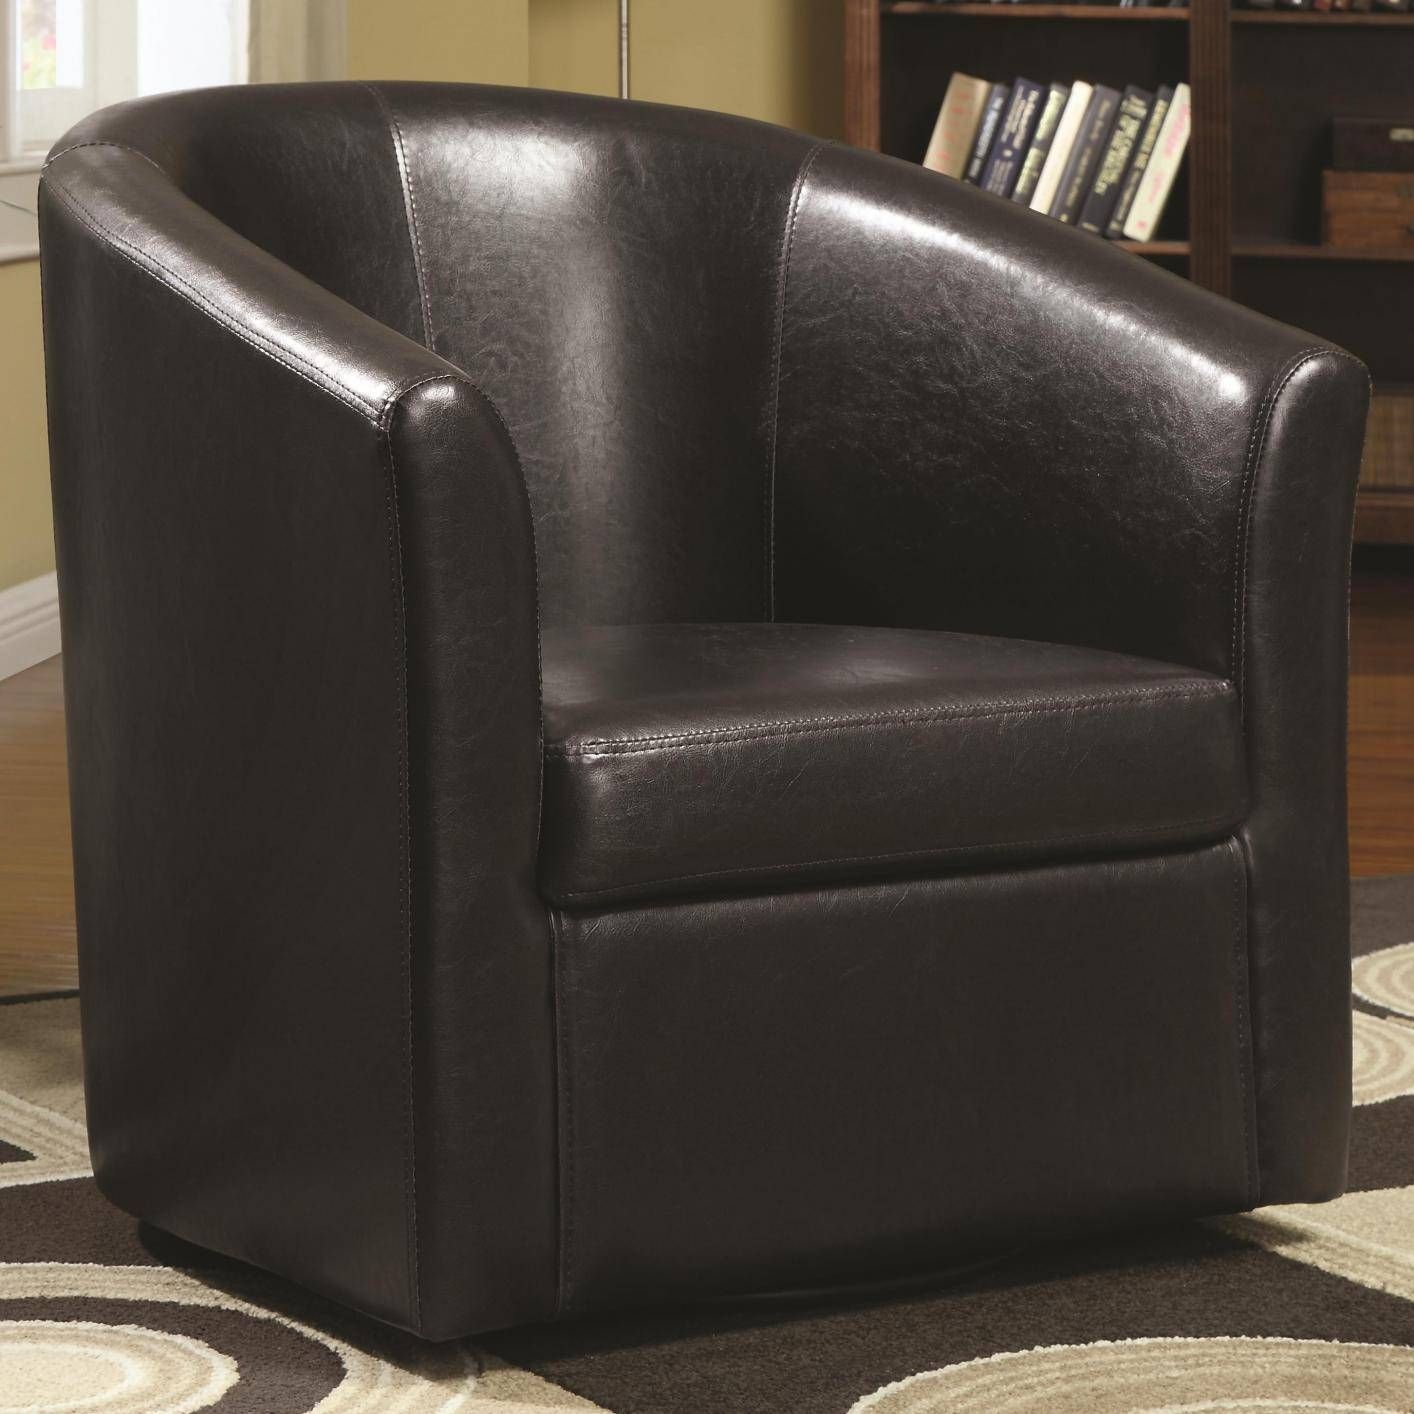 Coaster 902098 Brown Leather Swivel Chair – Steal A Sofa Furniture For Sofa With Swivel Chair (View 28 of 30)